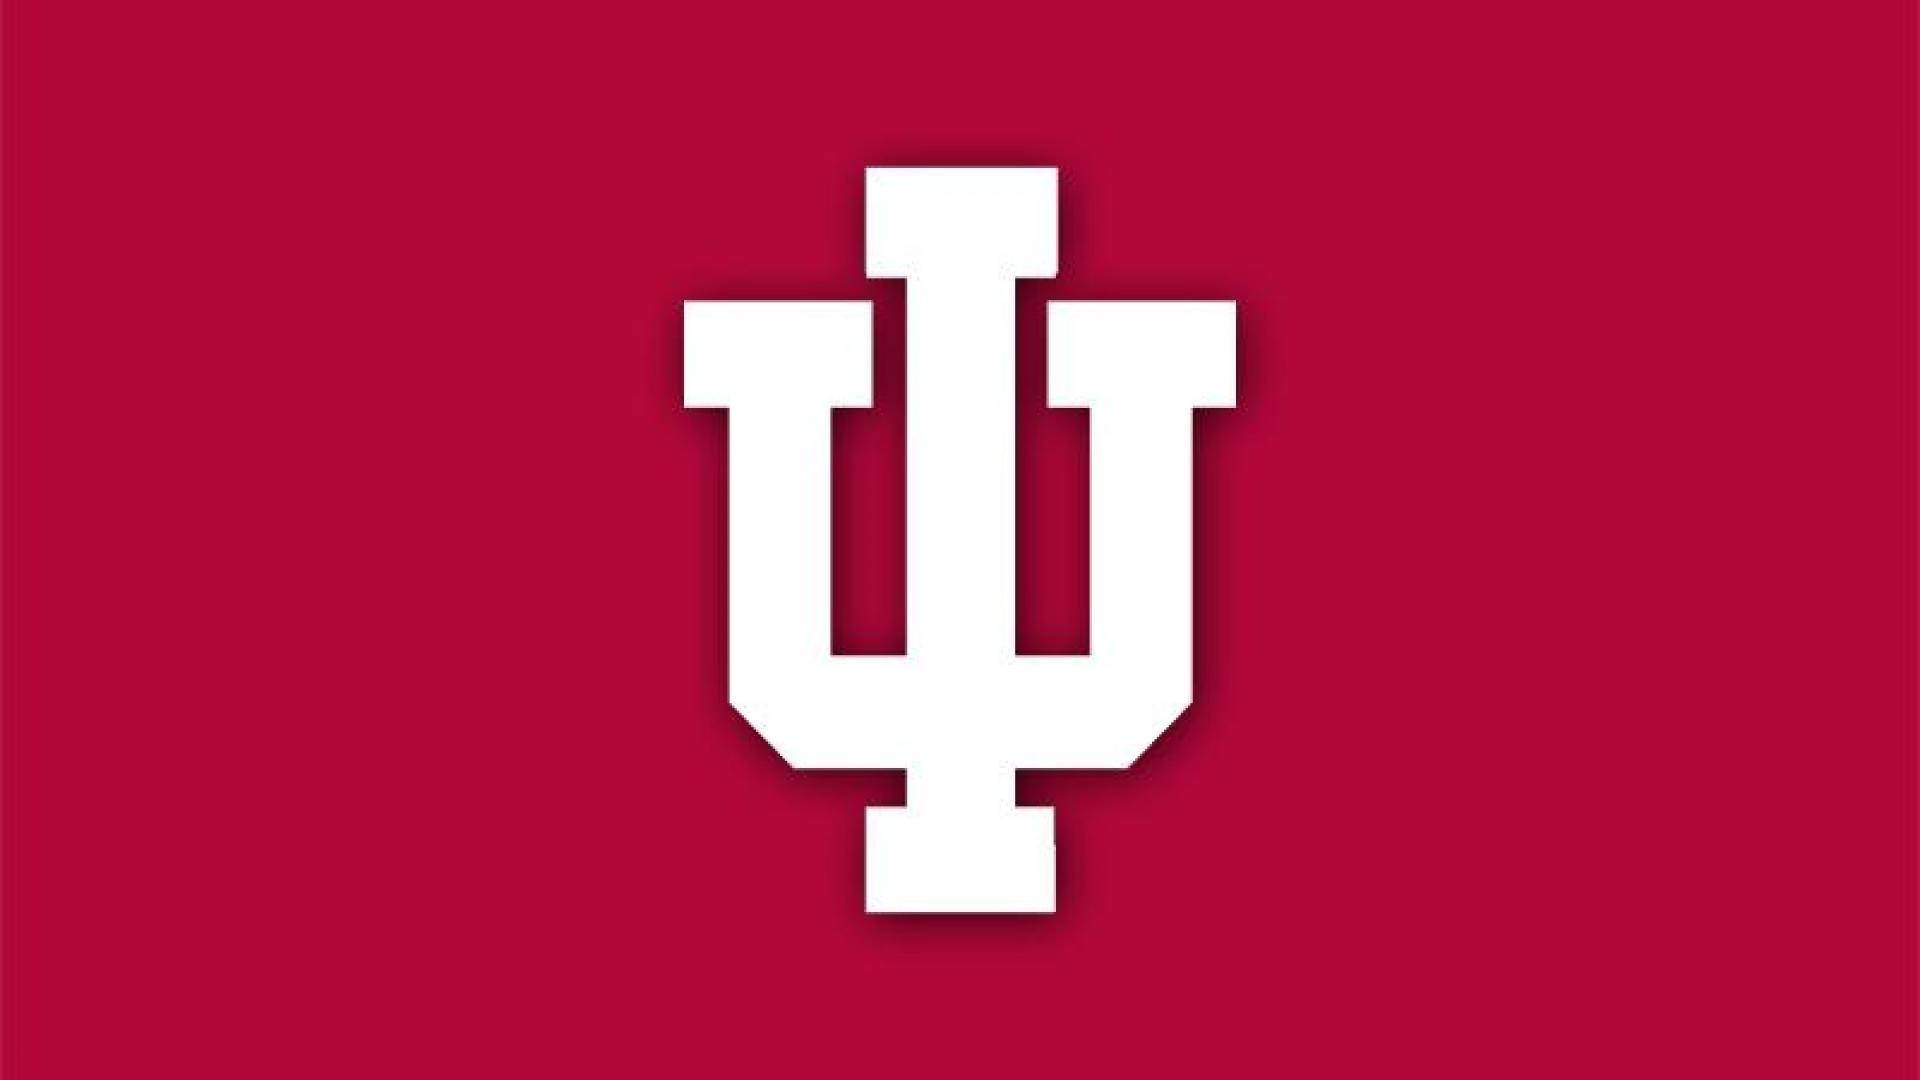 Indiana Hoosiers Logo Red Background Wallpaper